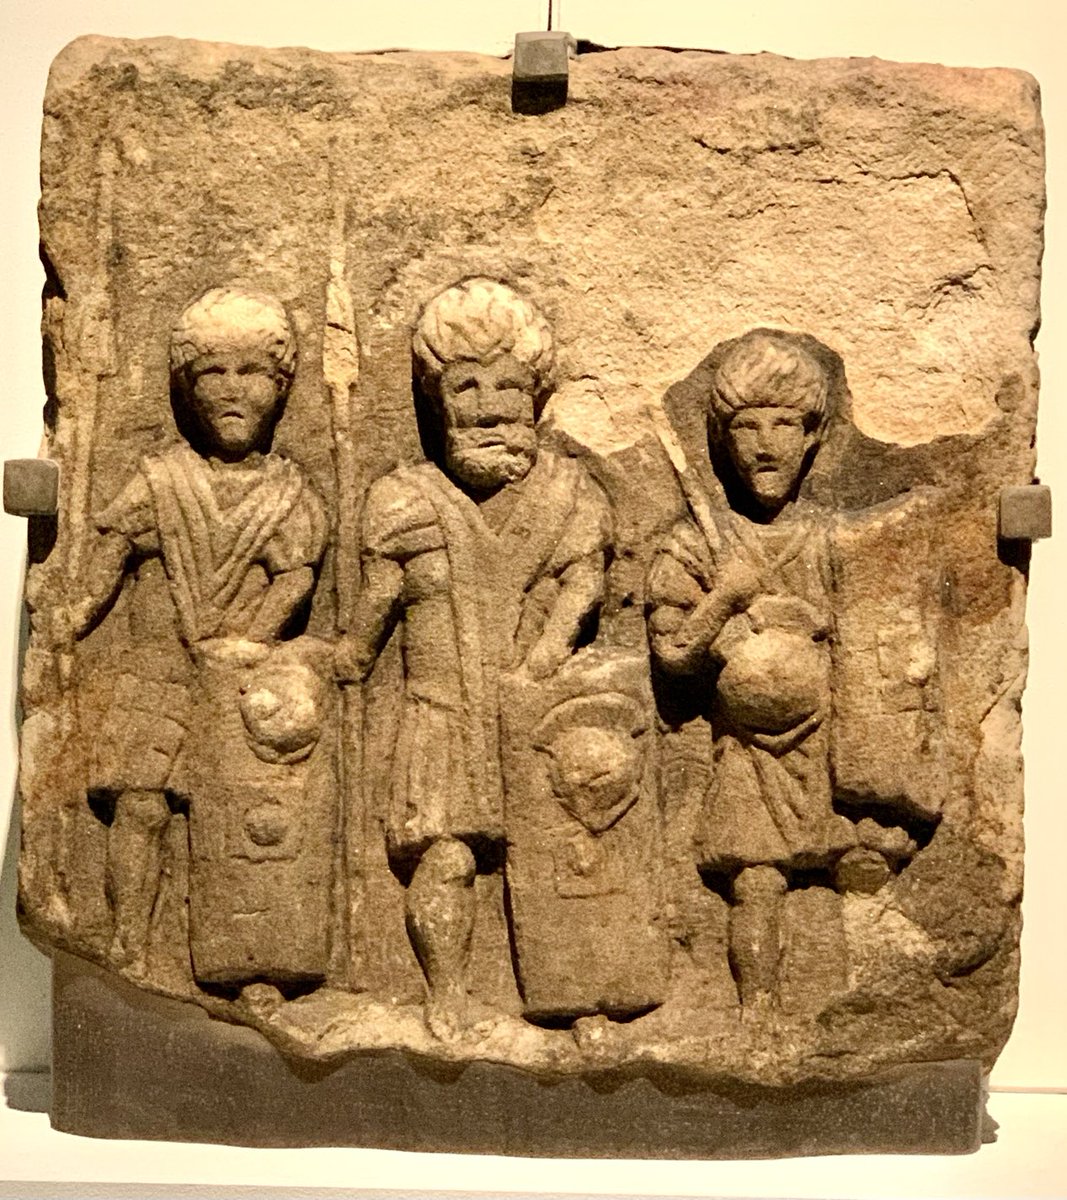 The Night’s Watch.
Three legionaries on a relief from Croy Hill fort on the Antonine Wall in Scotland, mid 2nd century AD.
Currently in the Legion exhibition ⁦@britishmuseum⁩
#RomanFortThursday